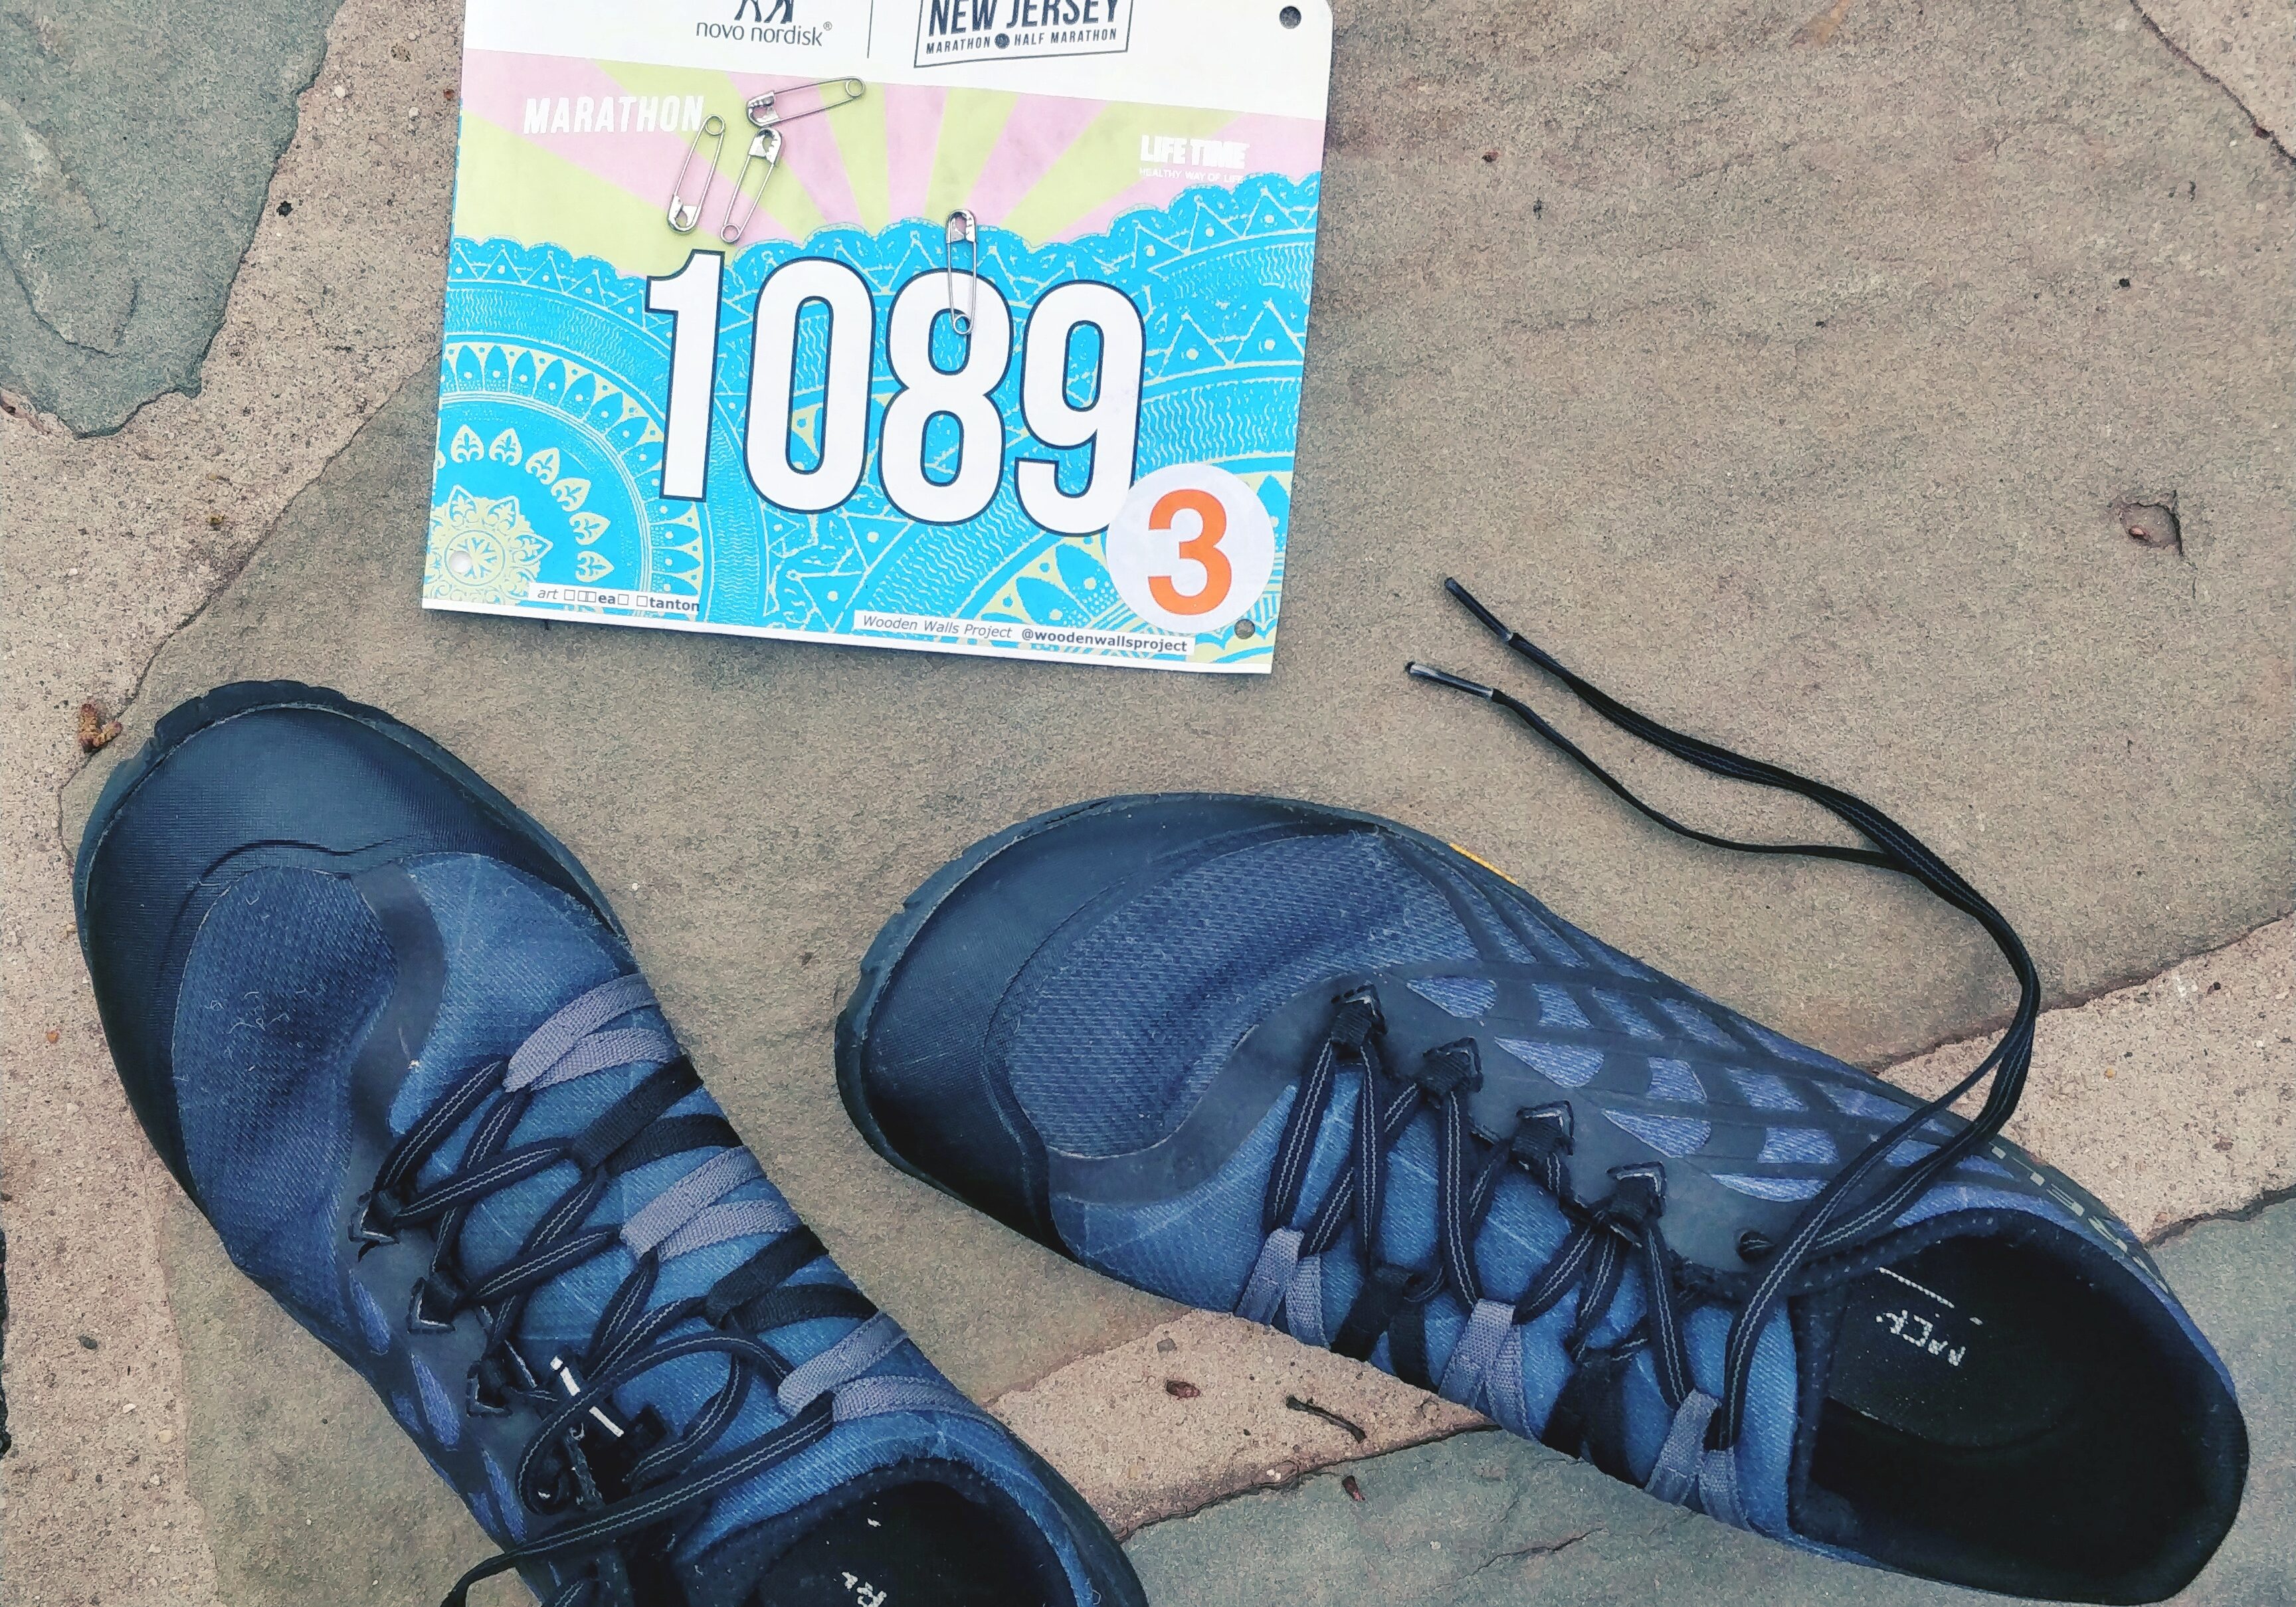 minimalist running shoes and a race bib for new jersey marathon